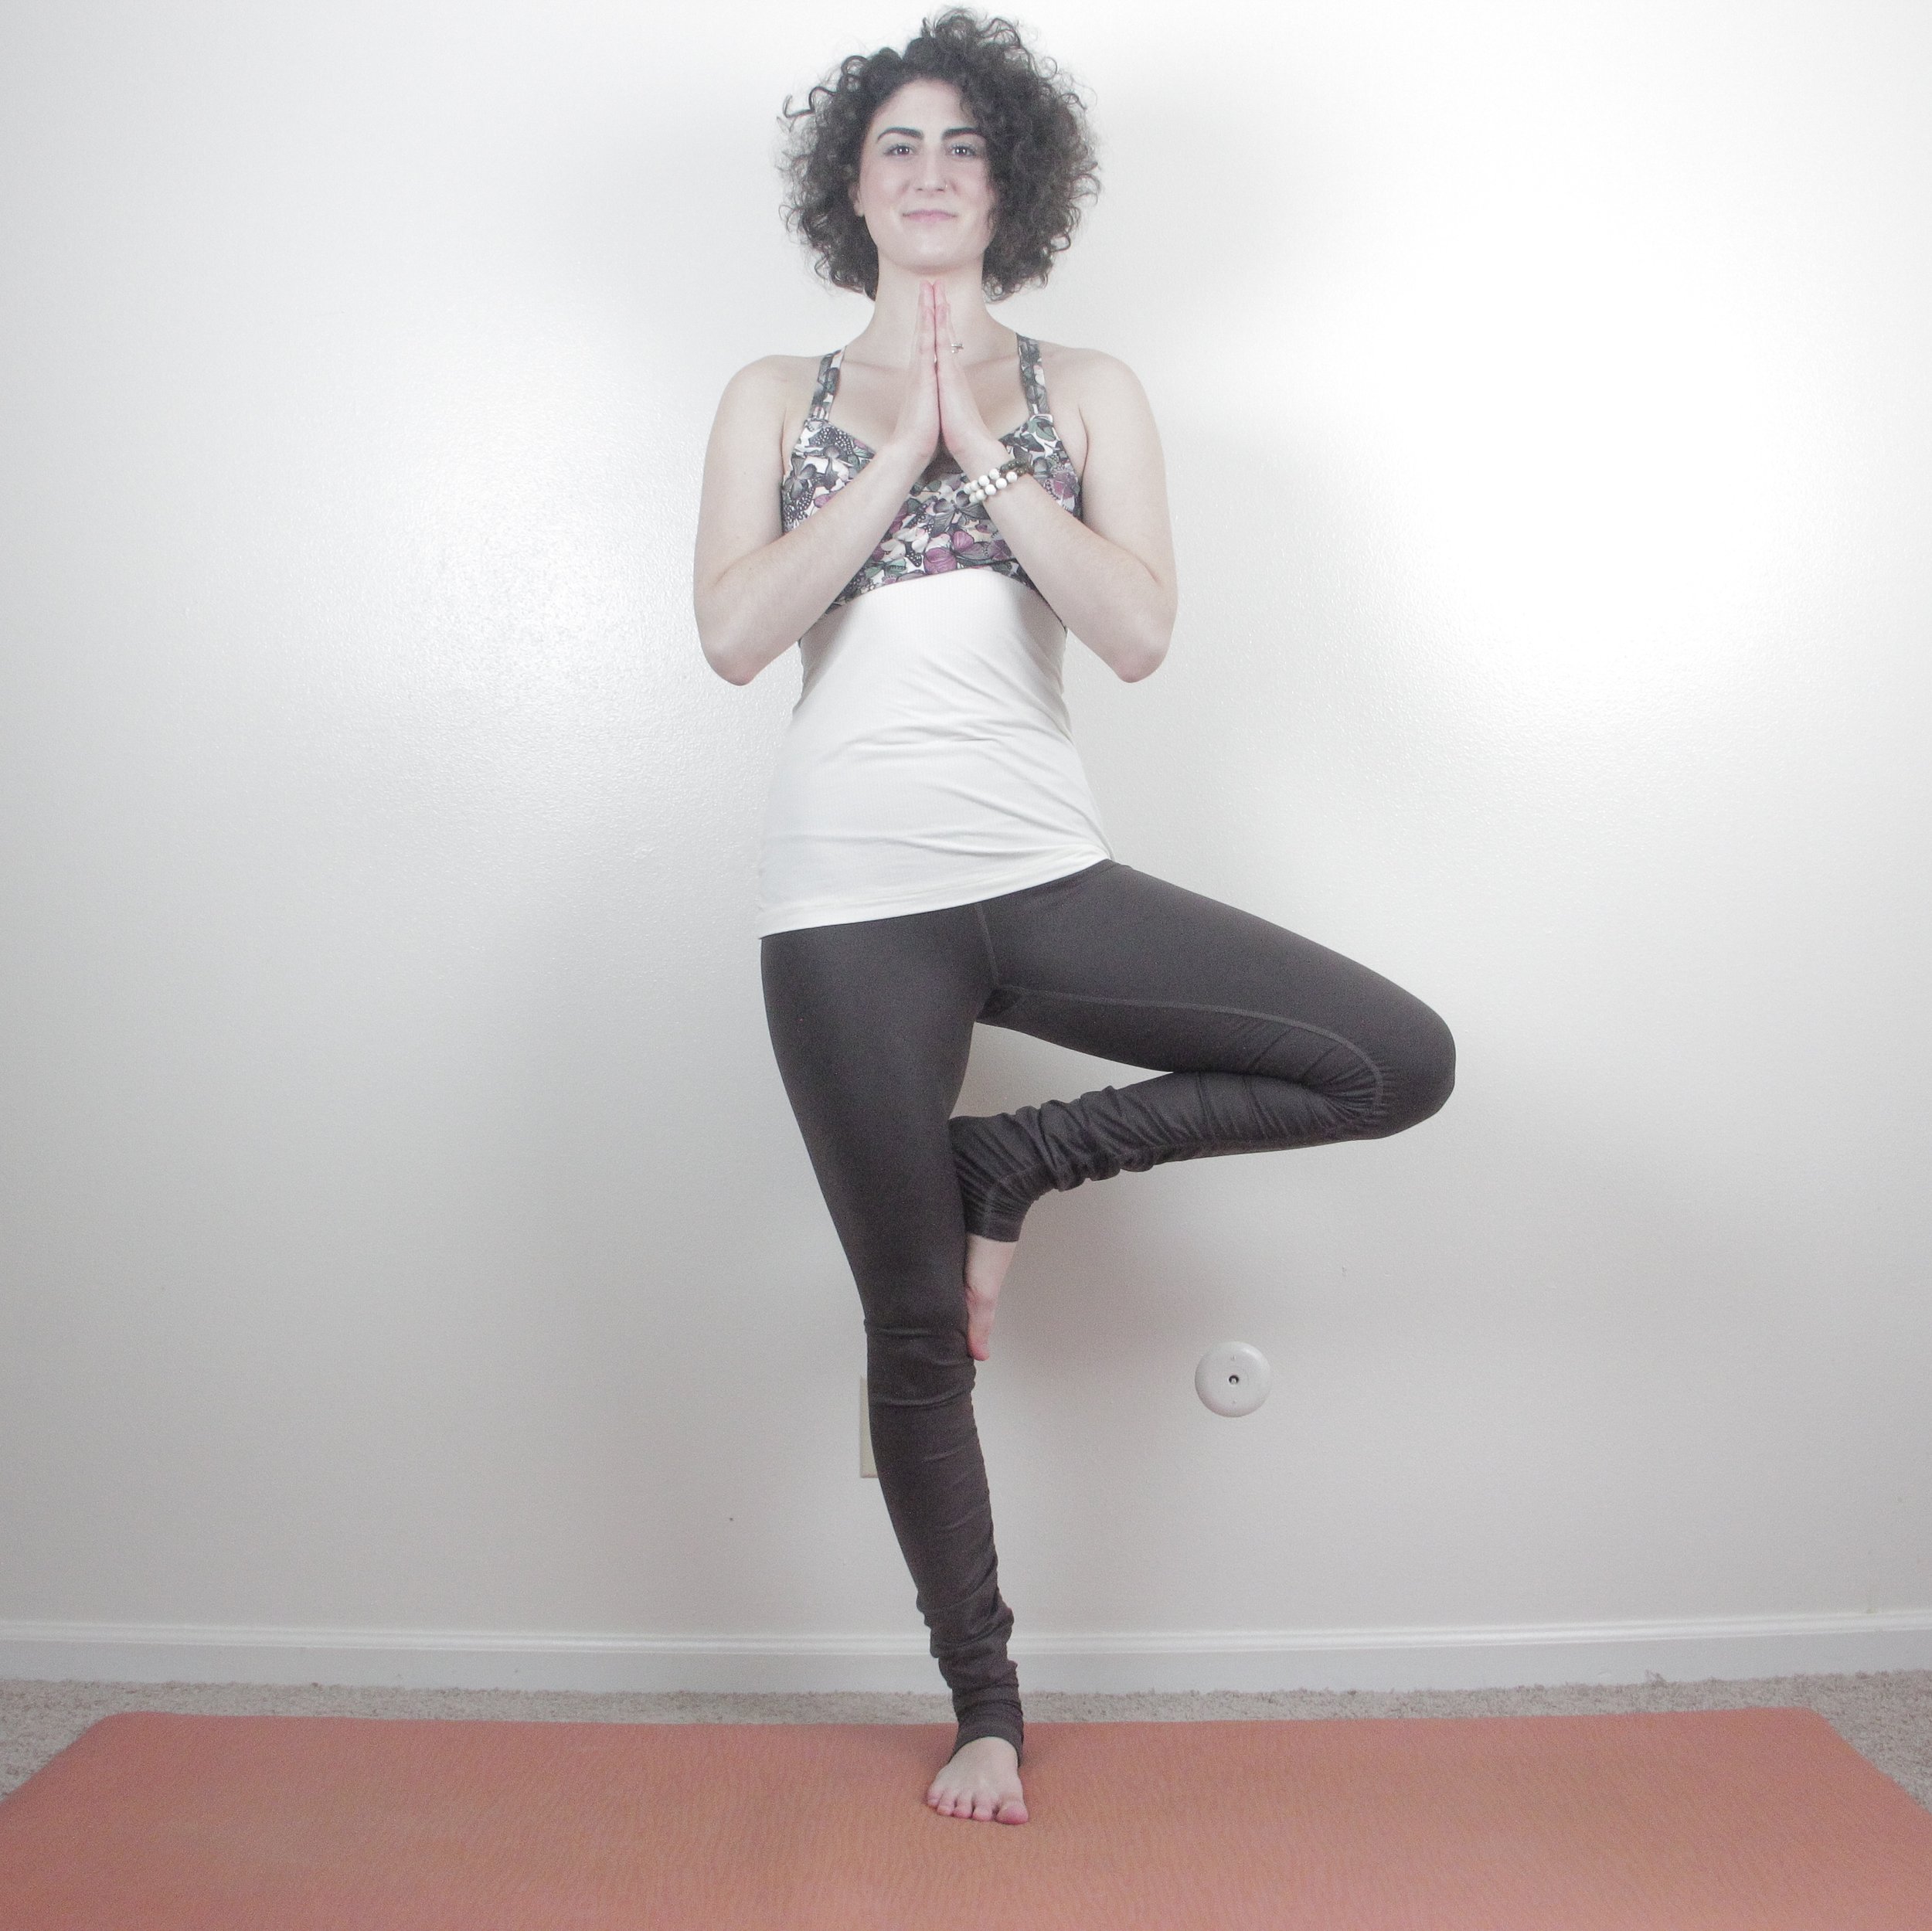 8 Steps to Master and Refine Tree Pose | Next in YOGAPEDIA M… | Flickr